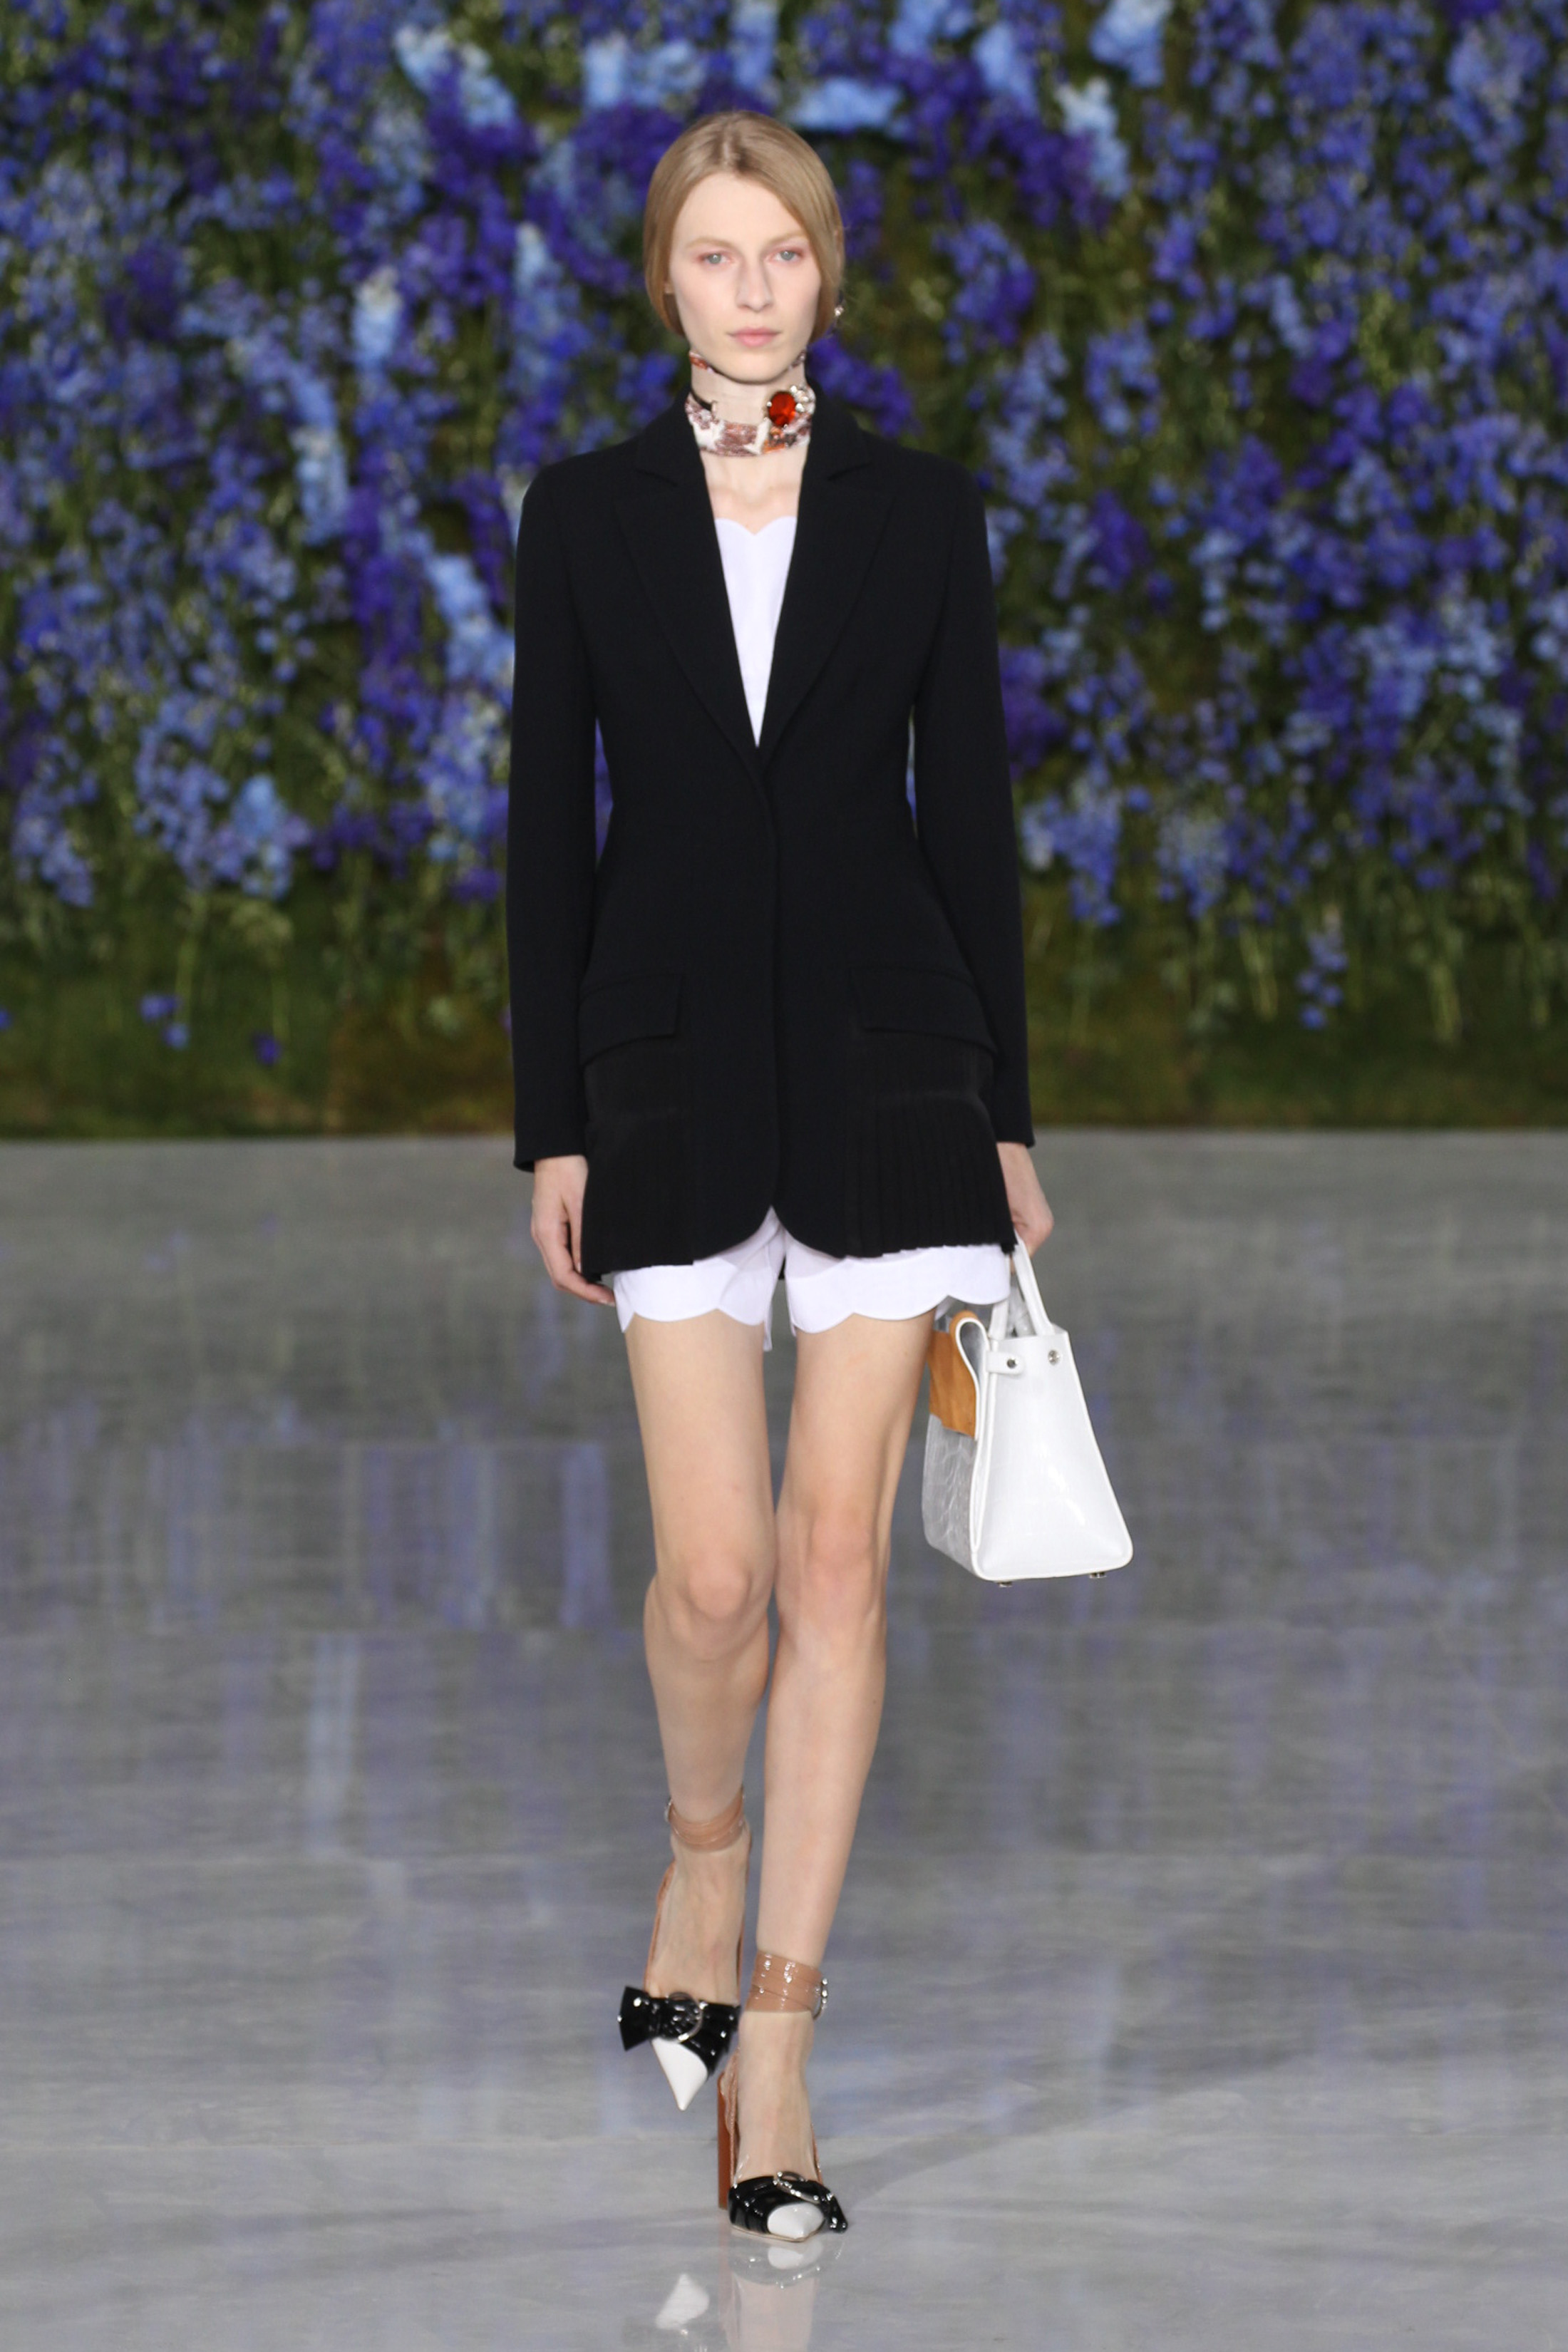 Blazers Are Back Just In Time For London Fashion Week | Fashion News ...